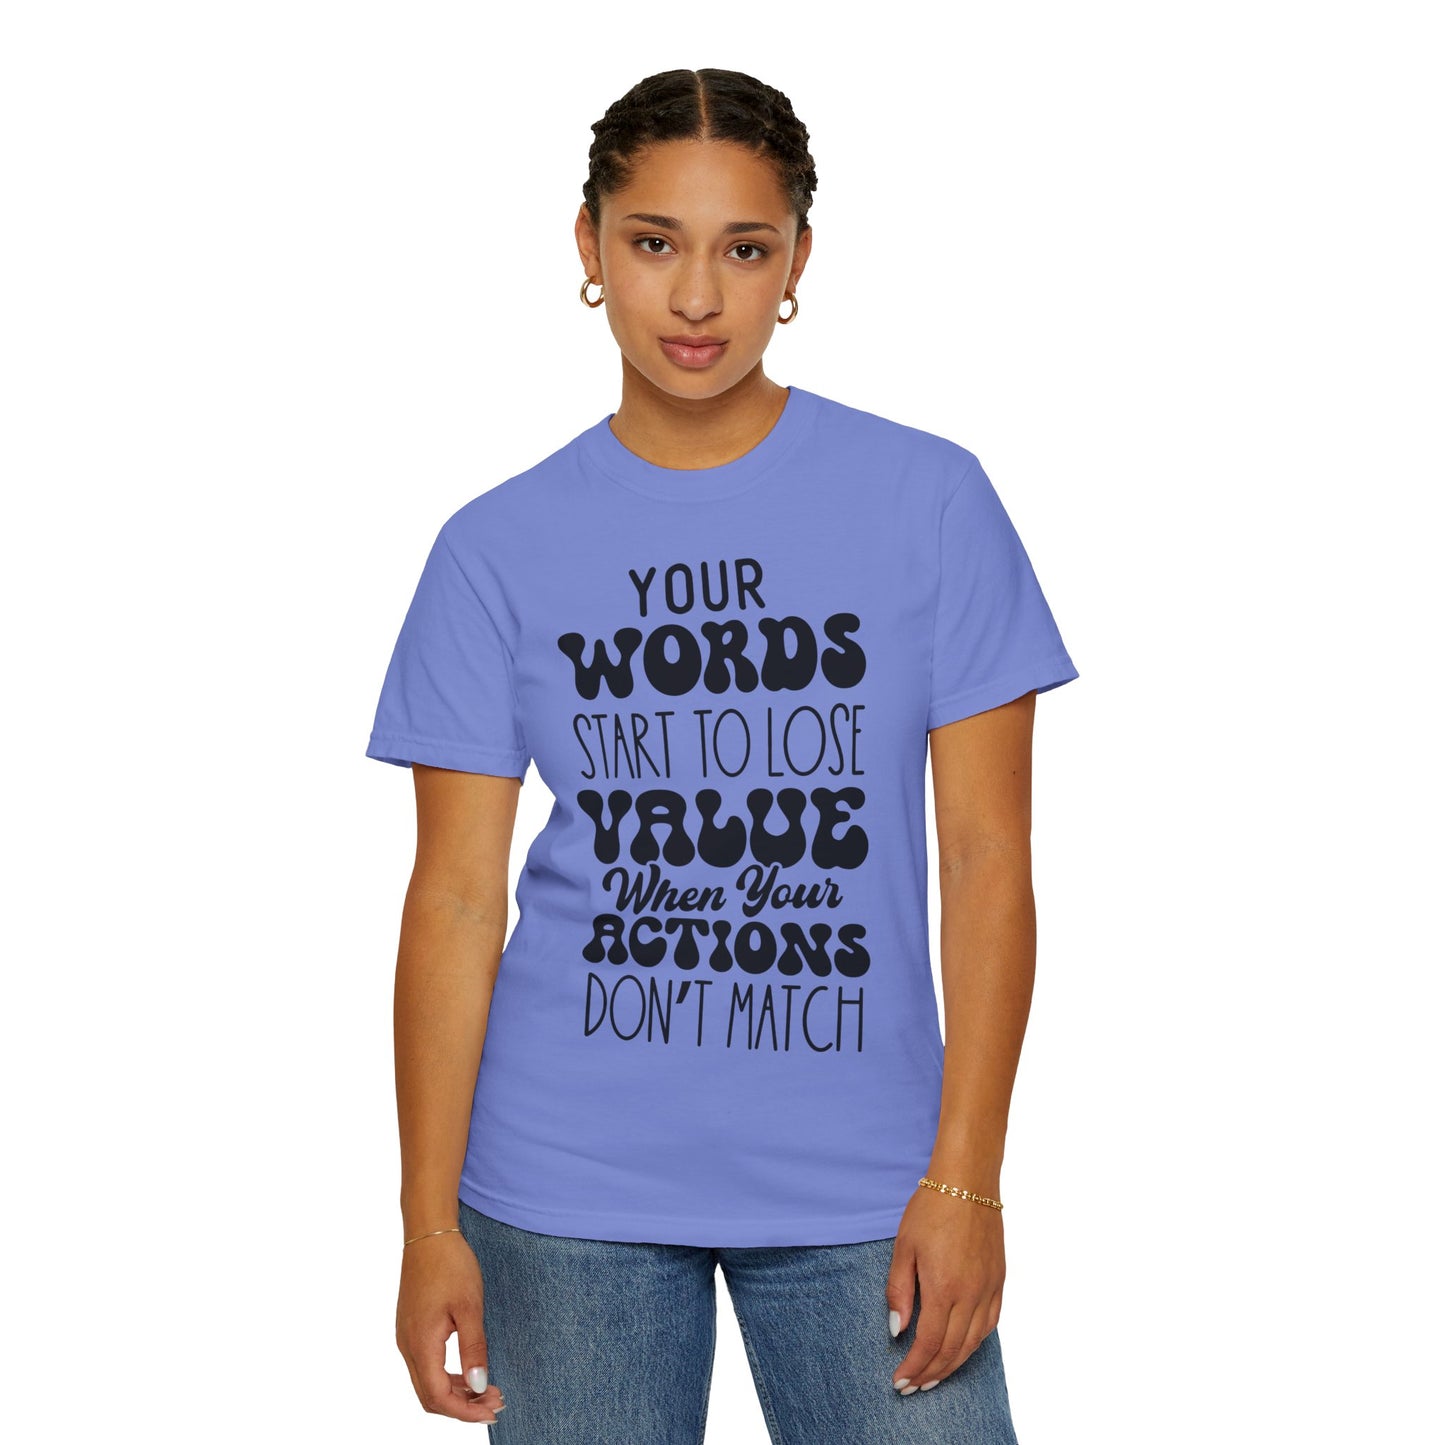 Your word starts to lose value - Unisex Garment-Dyed T-shirt